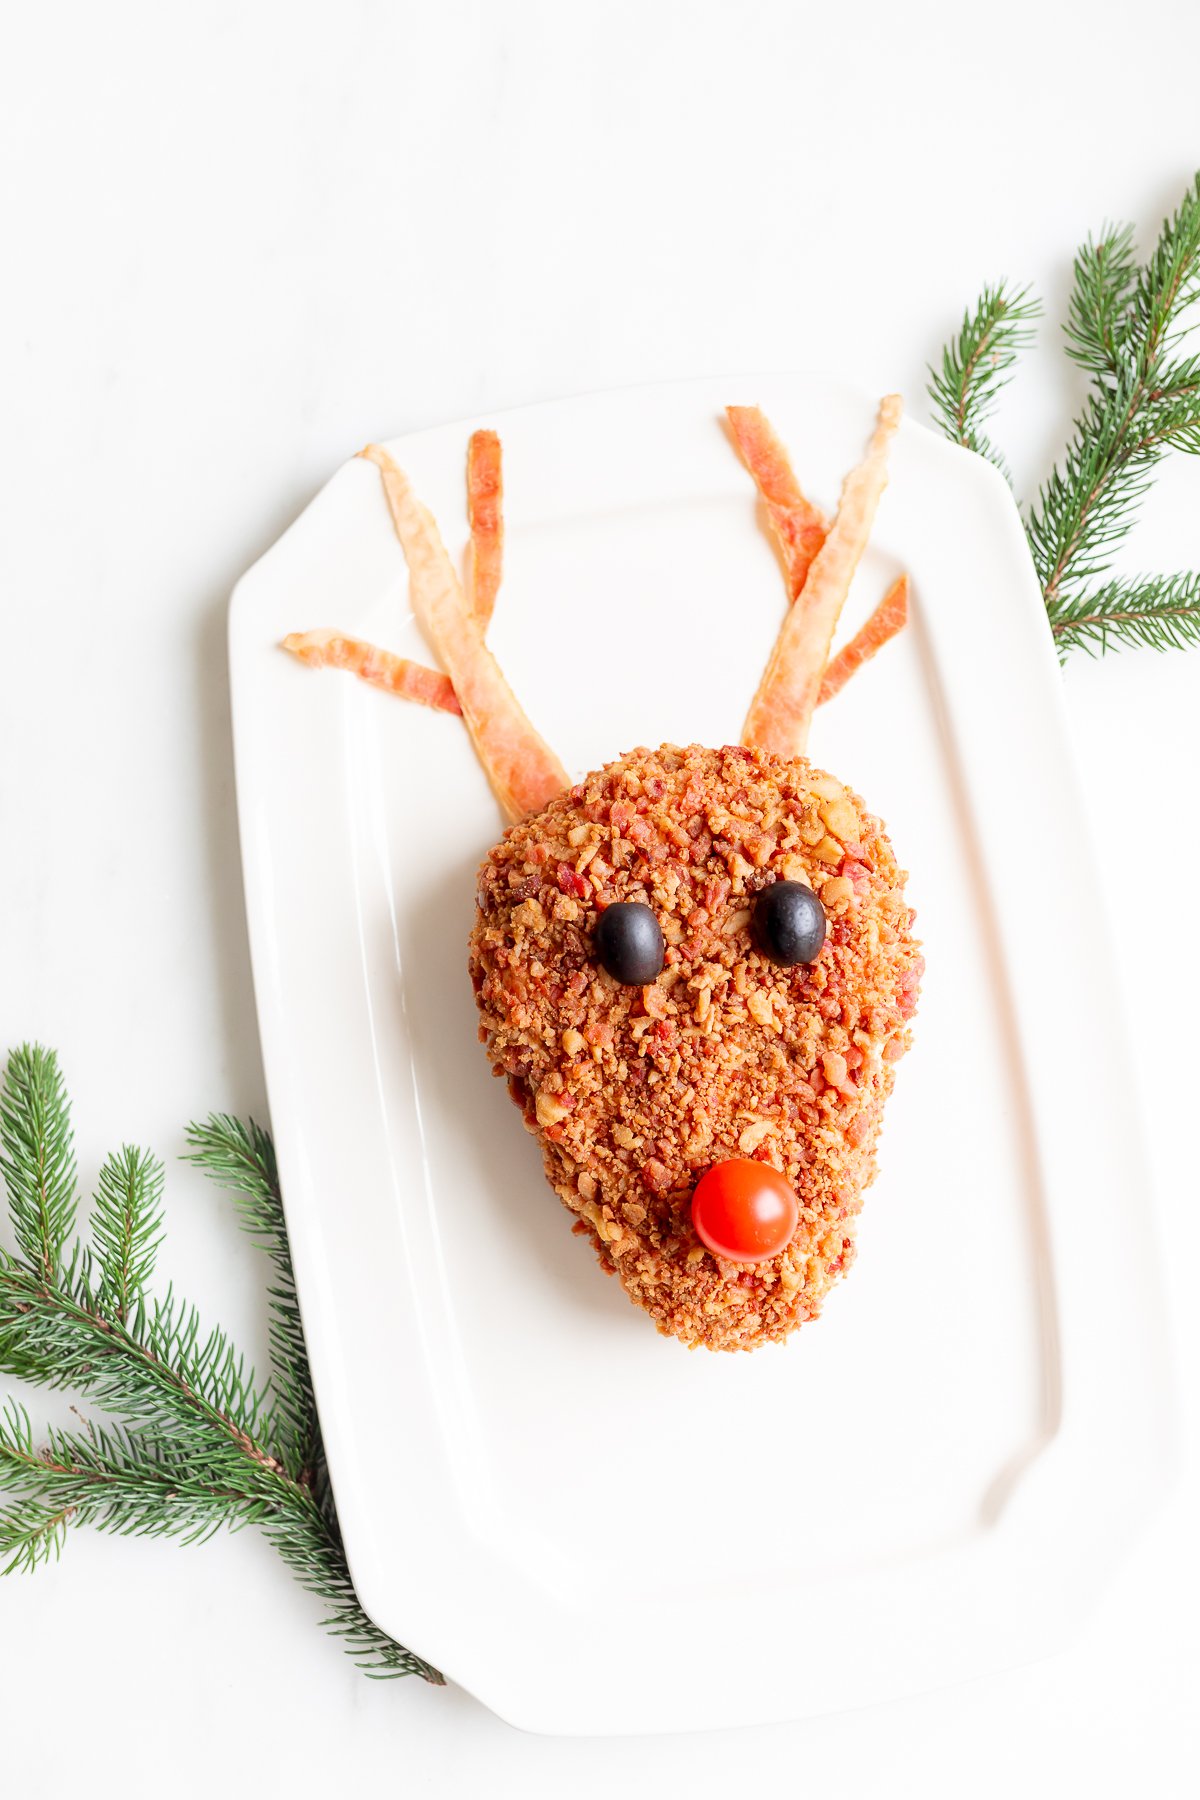 A plate with a reindeer head on it, holding a reindeer cheeseball.